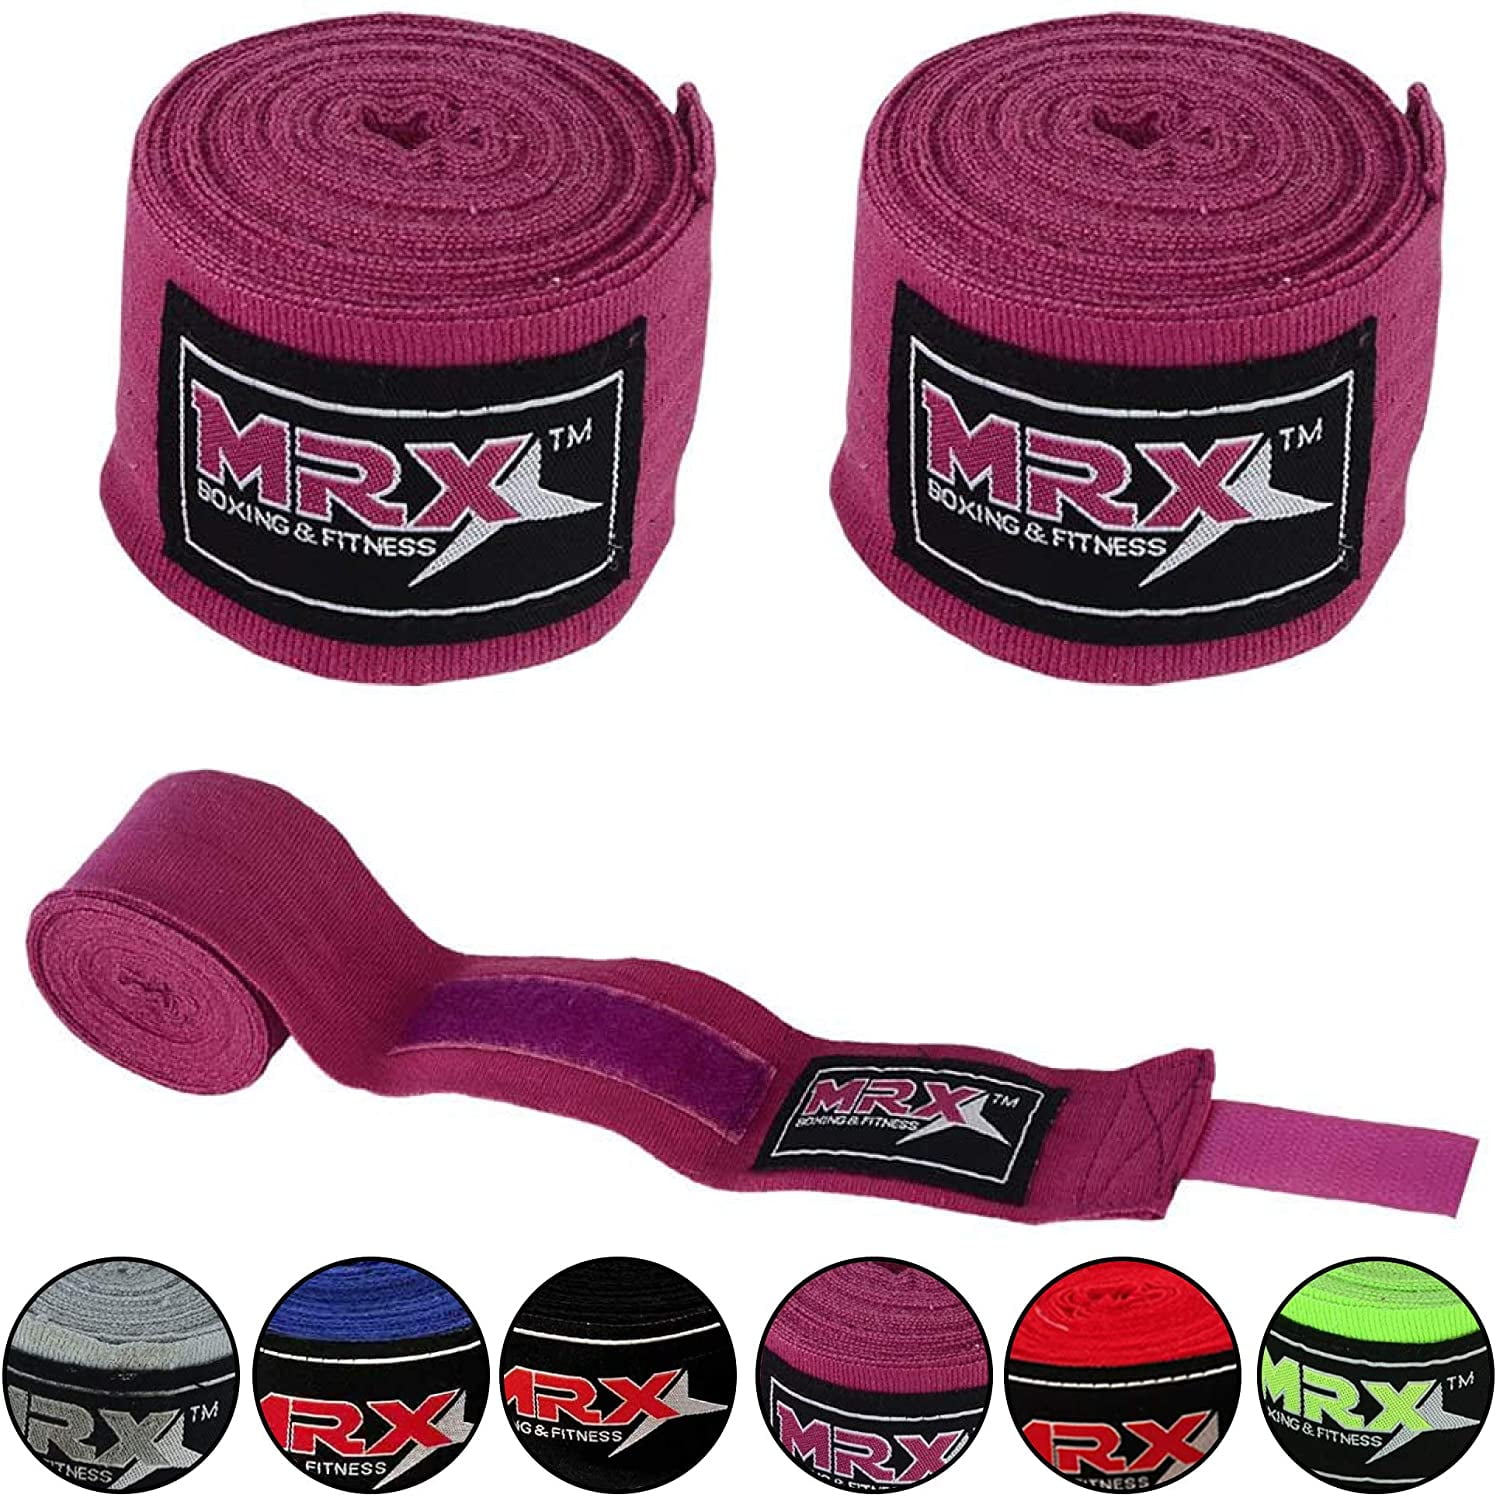 Details about   Counter Strike HANDWRAPS Protective Elastic HAND WRAPS Blue Green Pink 120" 